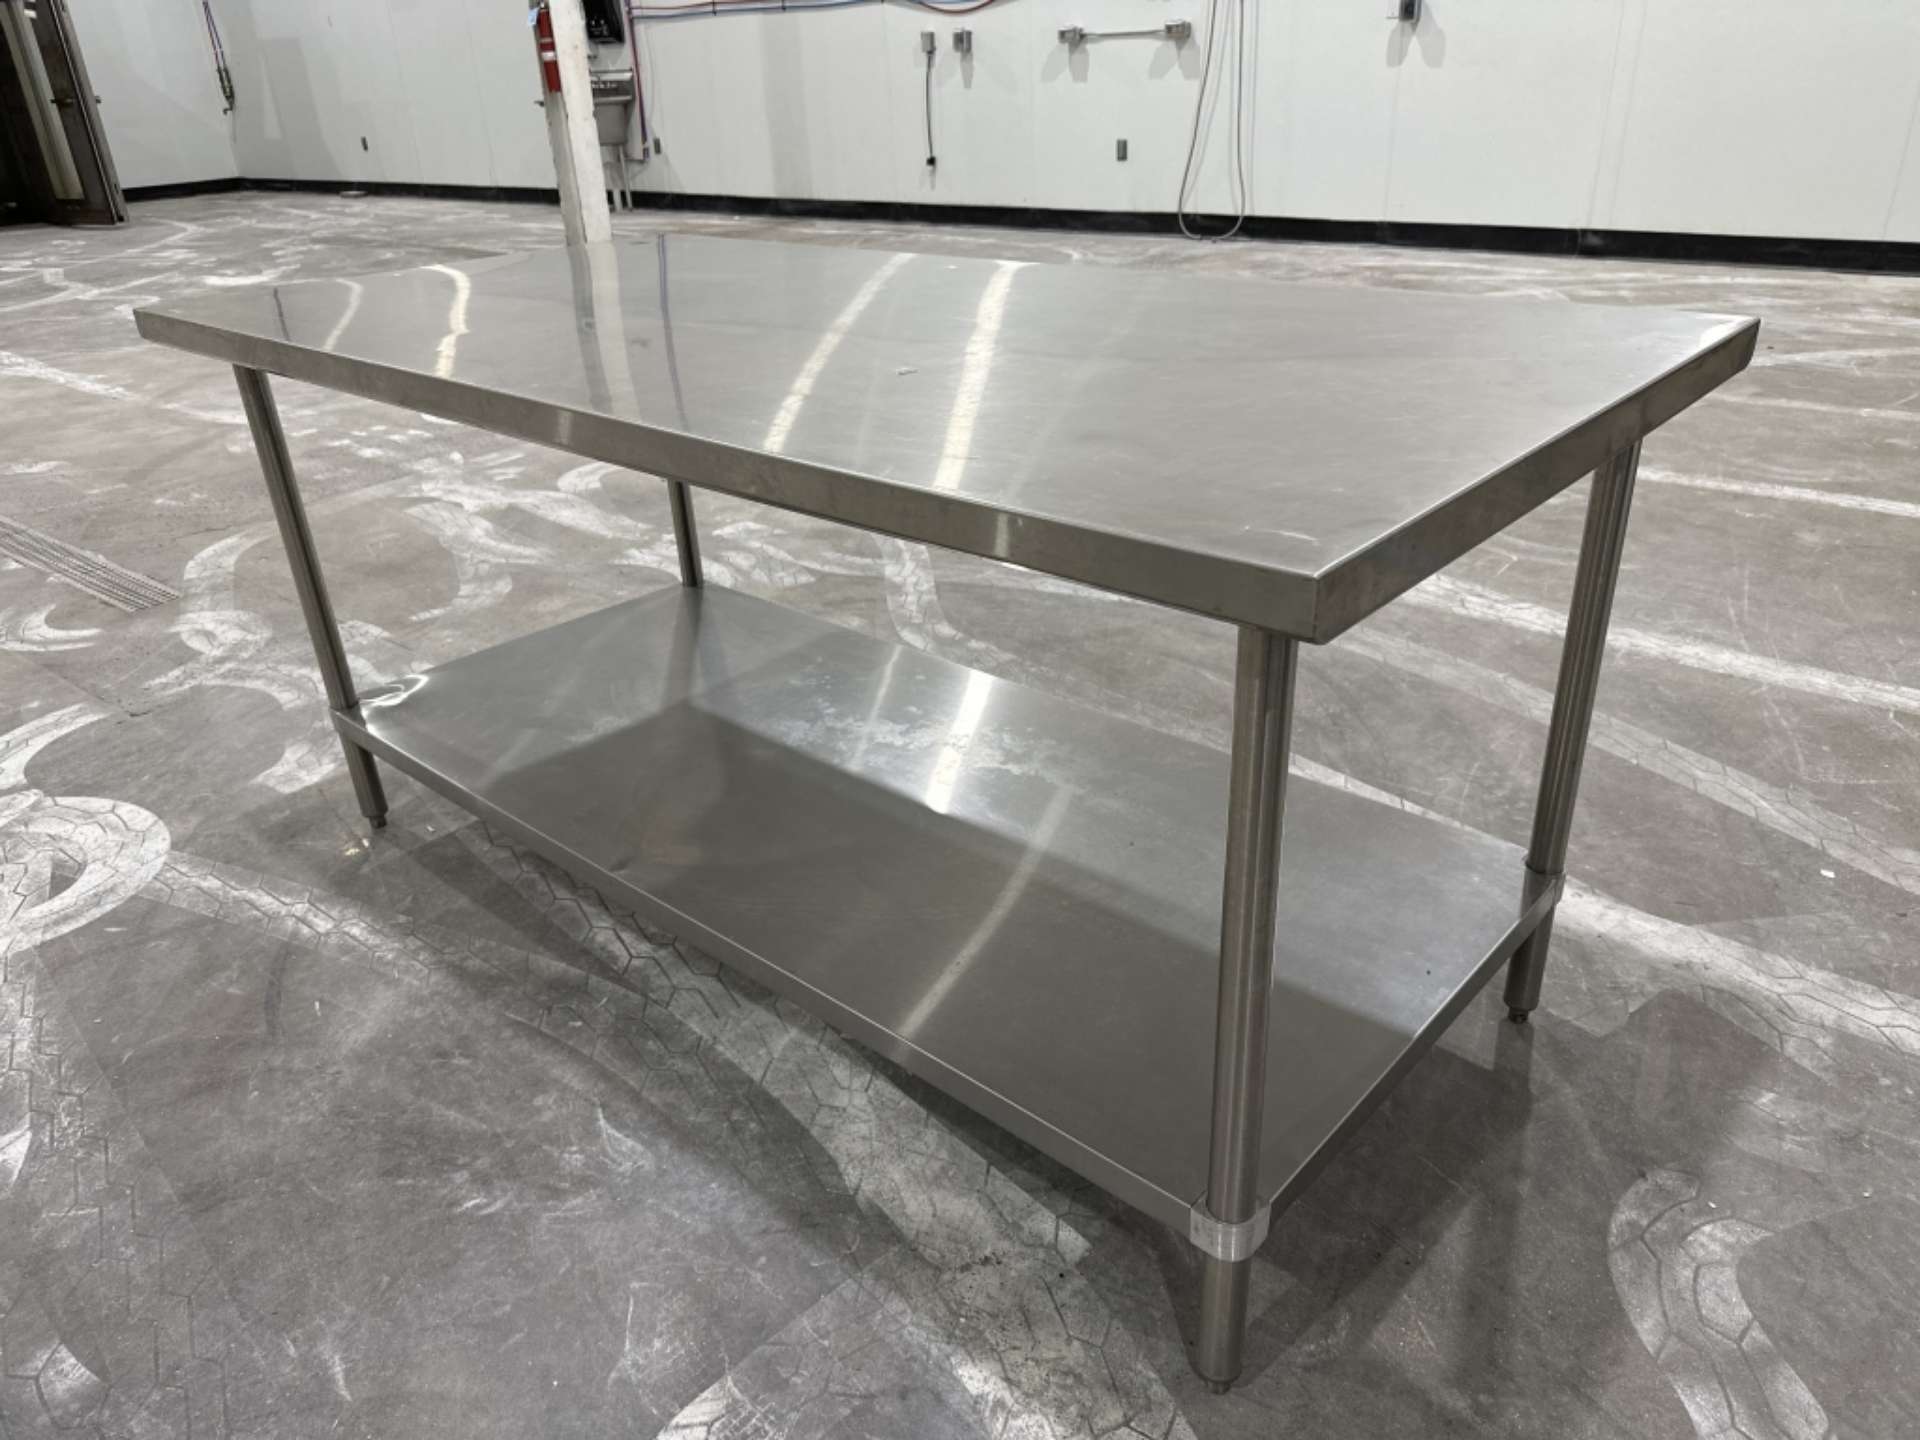 Stainless Steel Prep Table - 6ft x 3ft